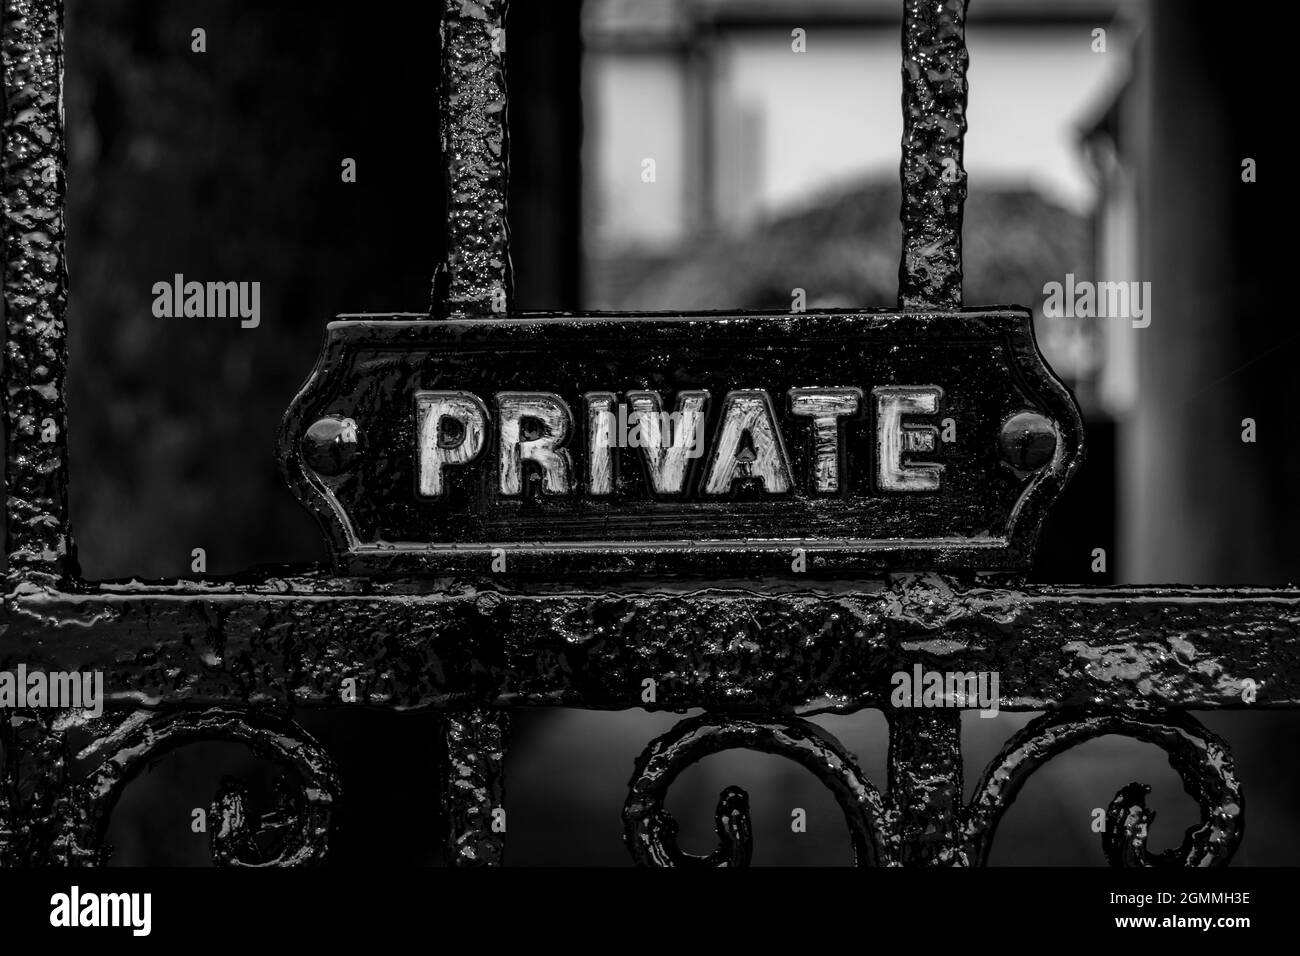 Private signage on a black metal ornamental gate Stock Photo